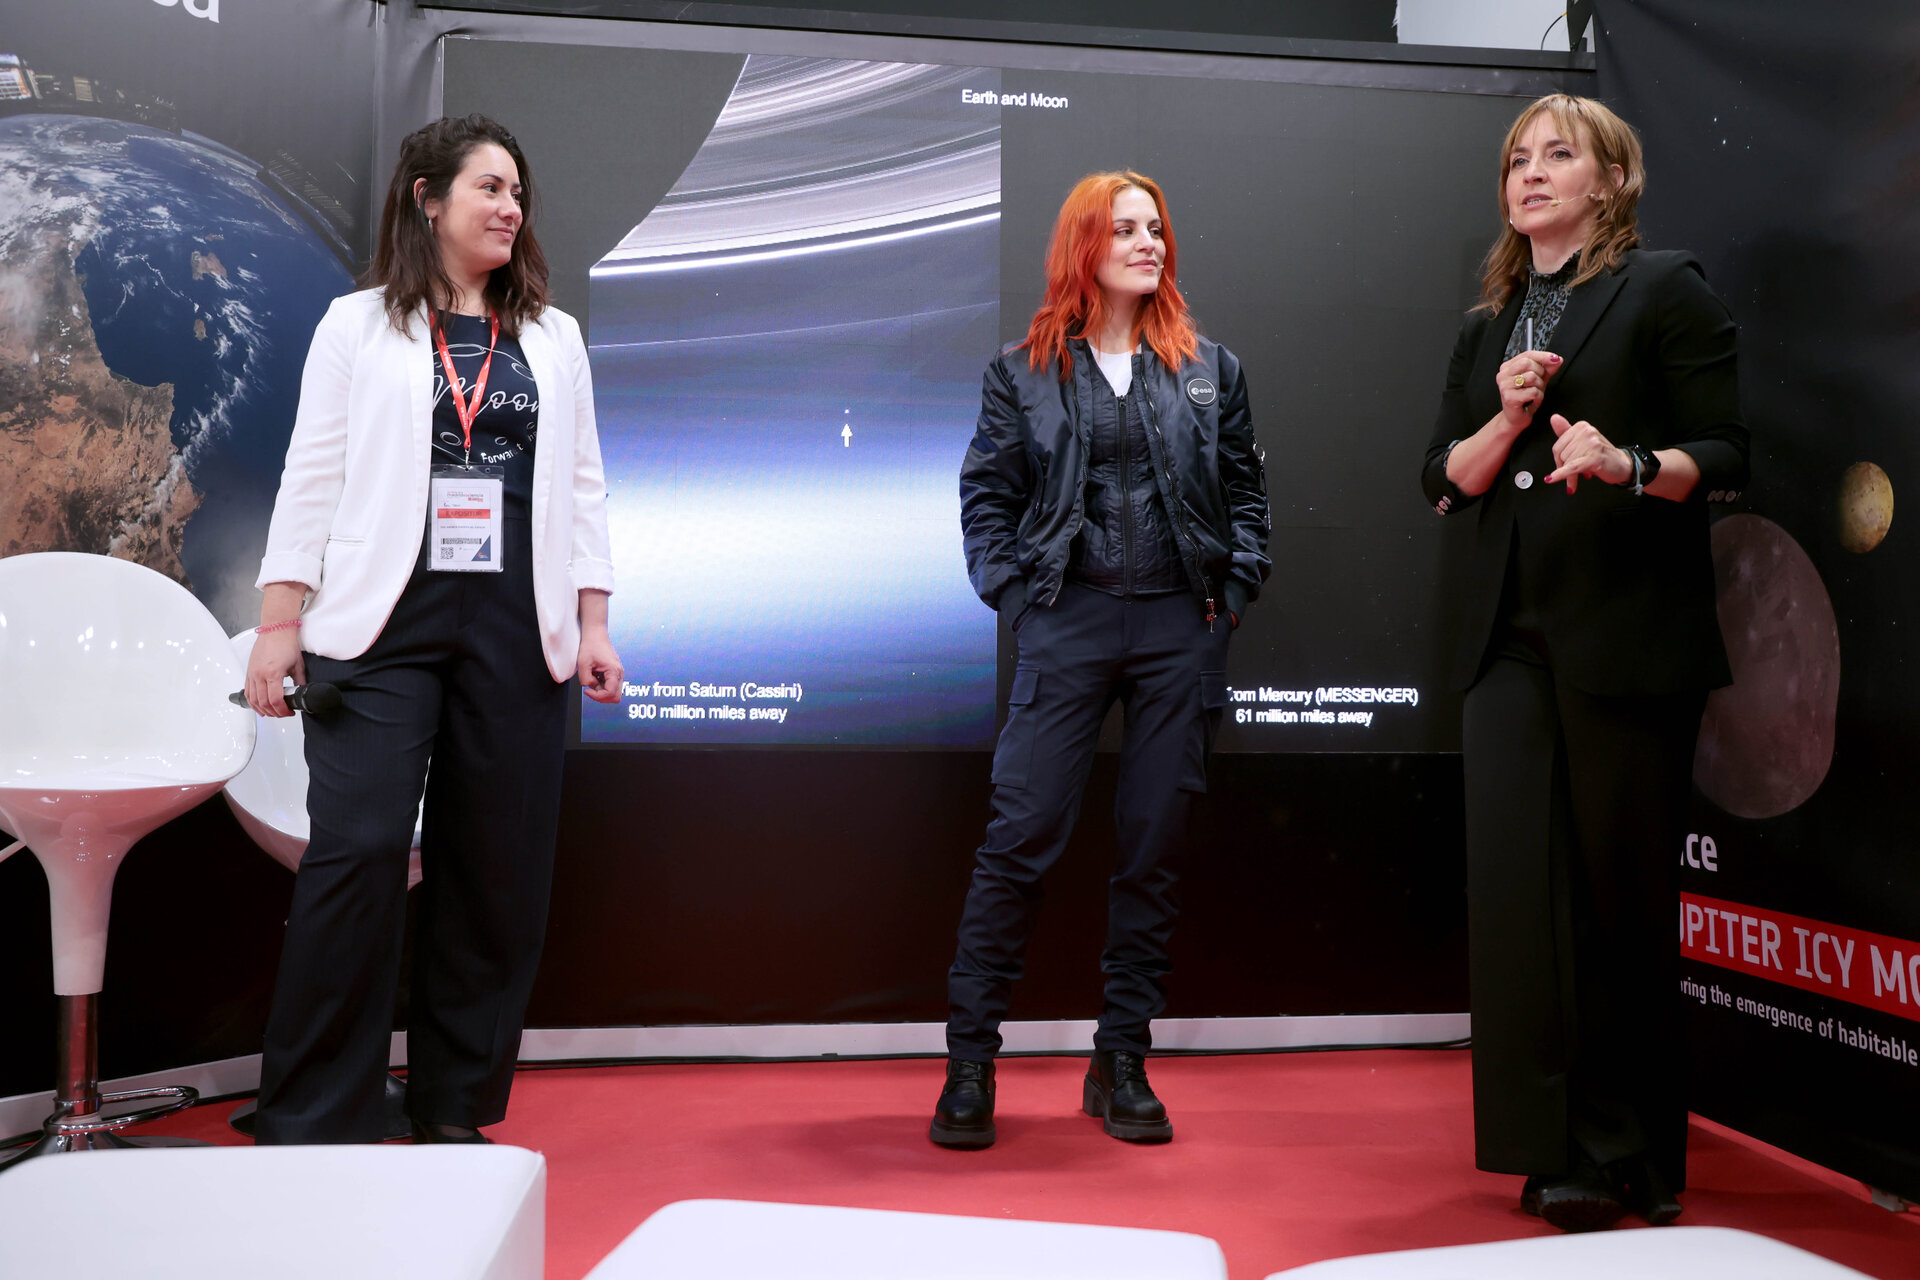 The event continued with a talk focused on empowering women in the fields of space and science.  From left to right:Sandra Benitez Herrera, Education Scientist and Communication Officer at ESA-ESAC; Sara Garcia, ESA Reserve Astronaut; Eva Villaver, Director of the Space and Society Office at AEE.